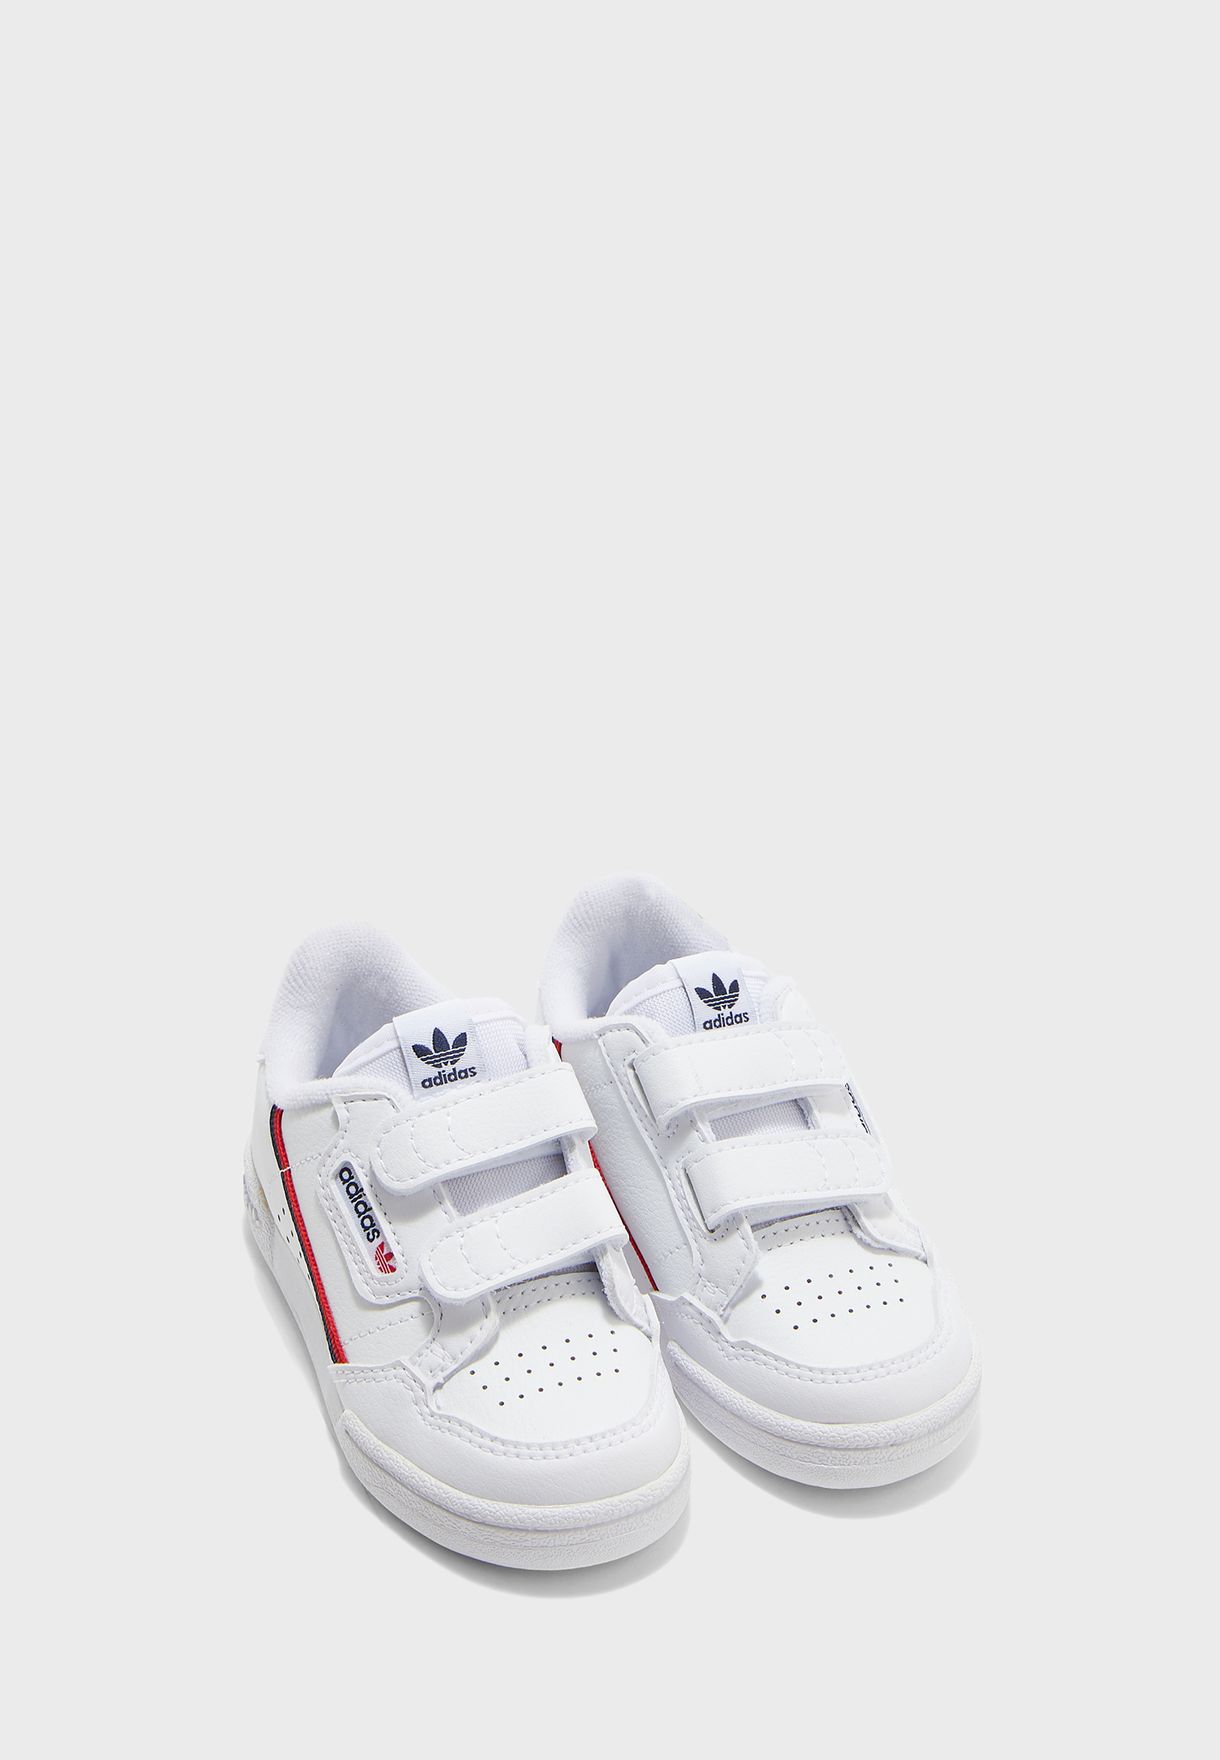 adidas continental 80 infant white